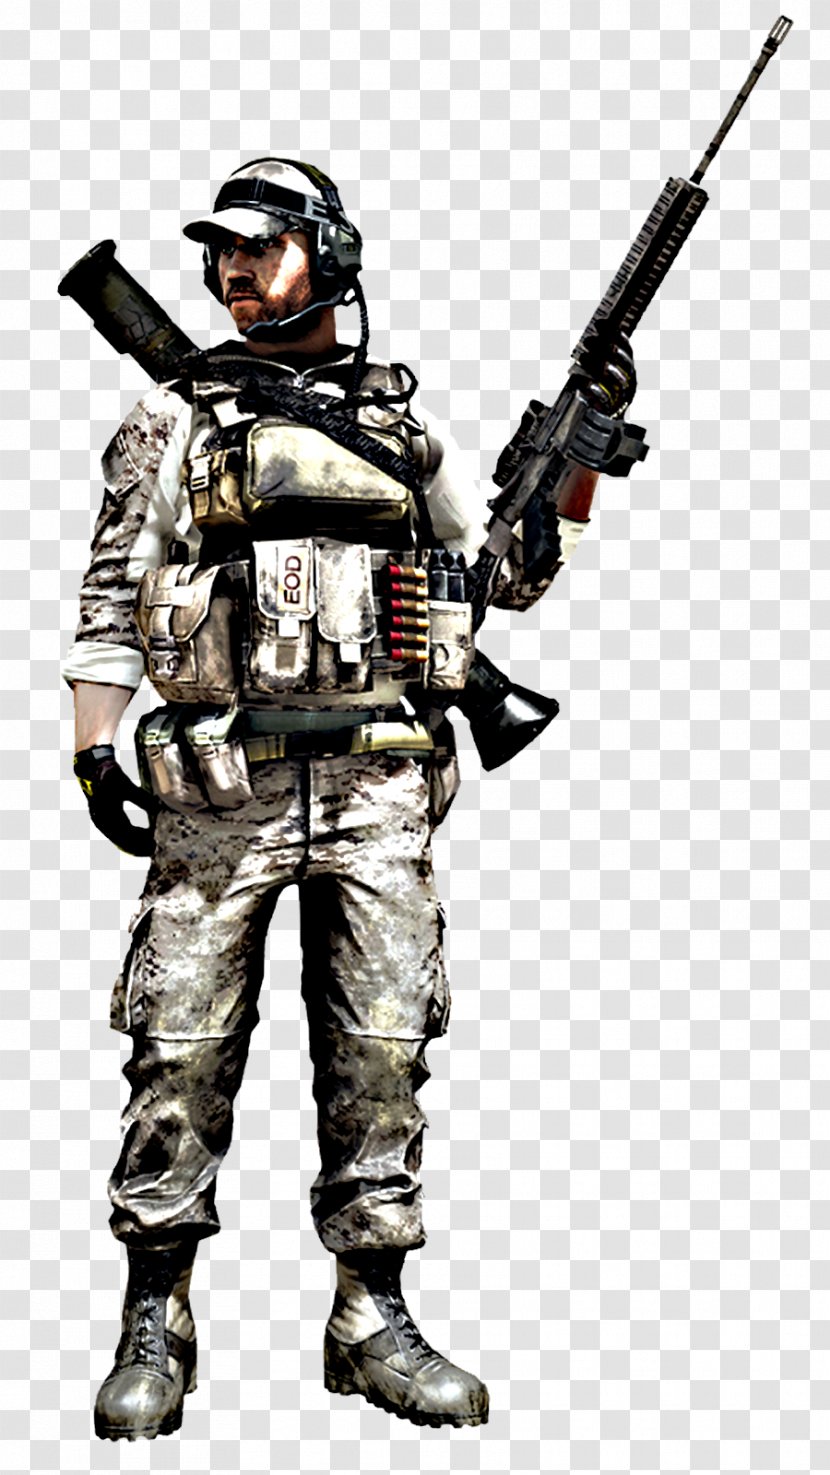 Battlefield 3 Battlefield: Bad Company 2 2142 4 Heroes - Weapon Transparent PNG